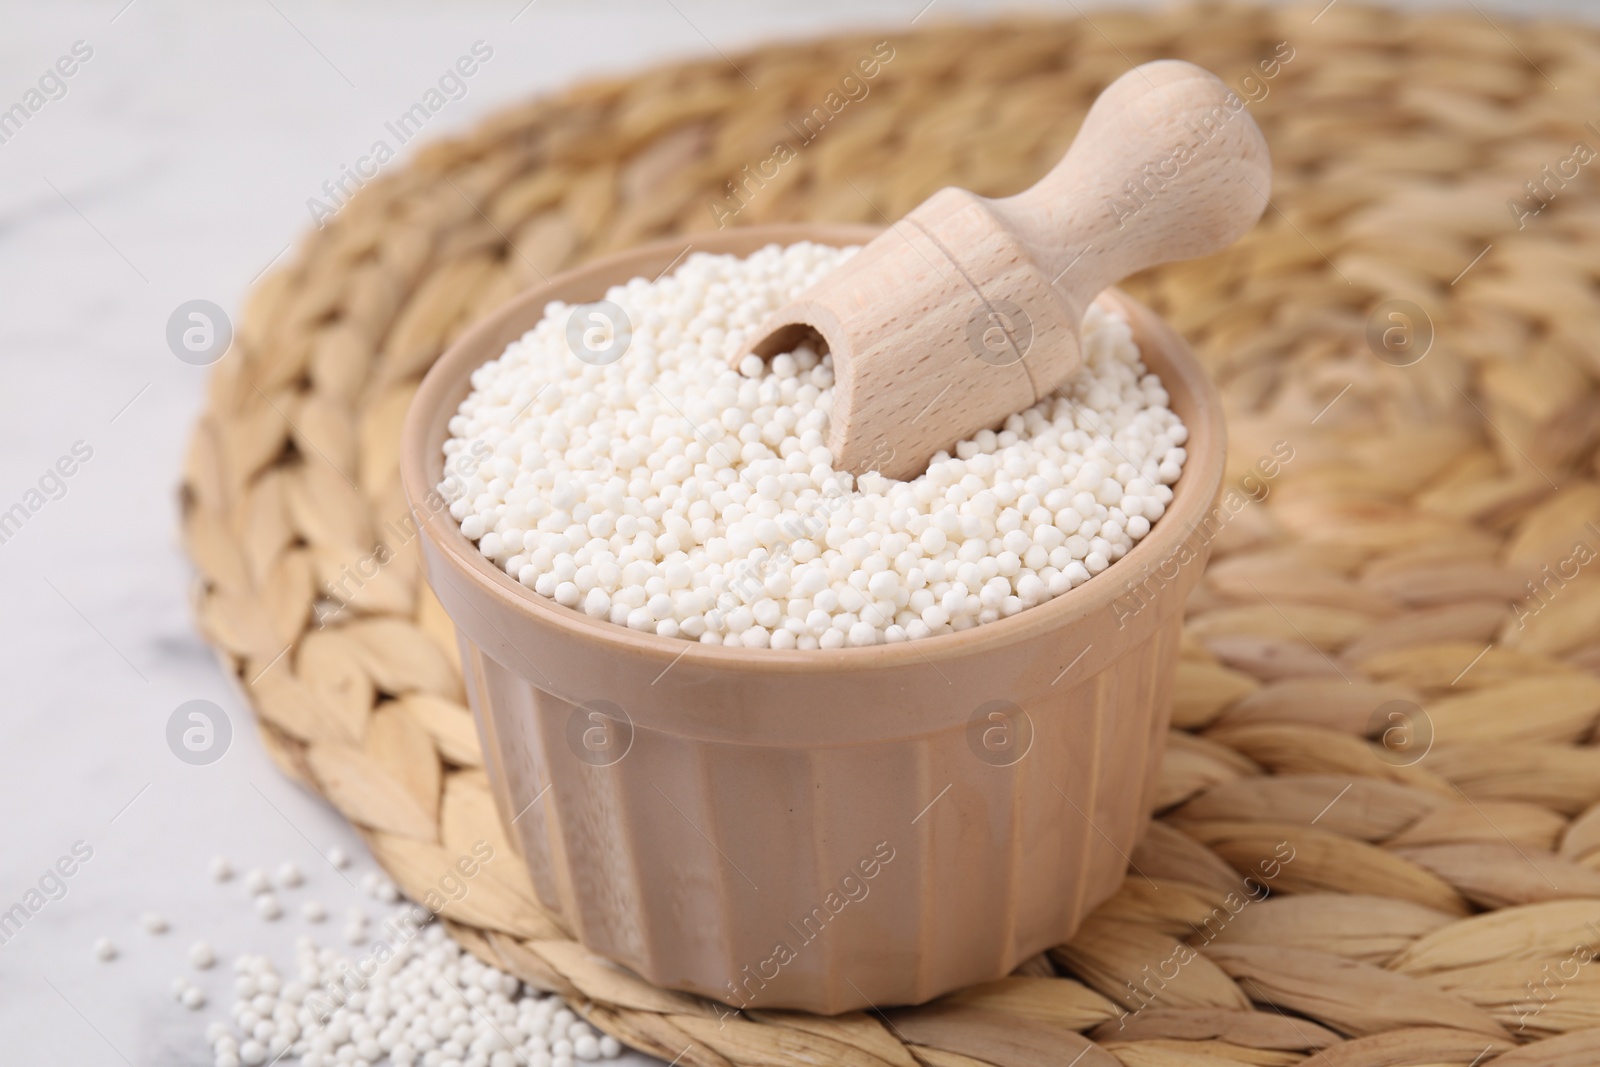 Photo of Tapioca pearls and scoop in bowl on wicker mat, closeup